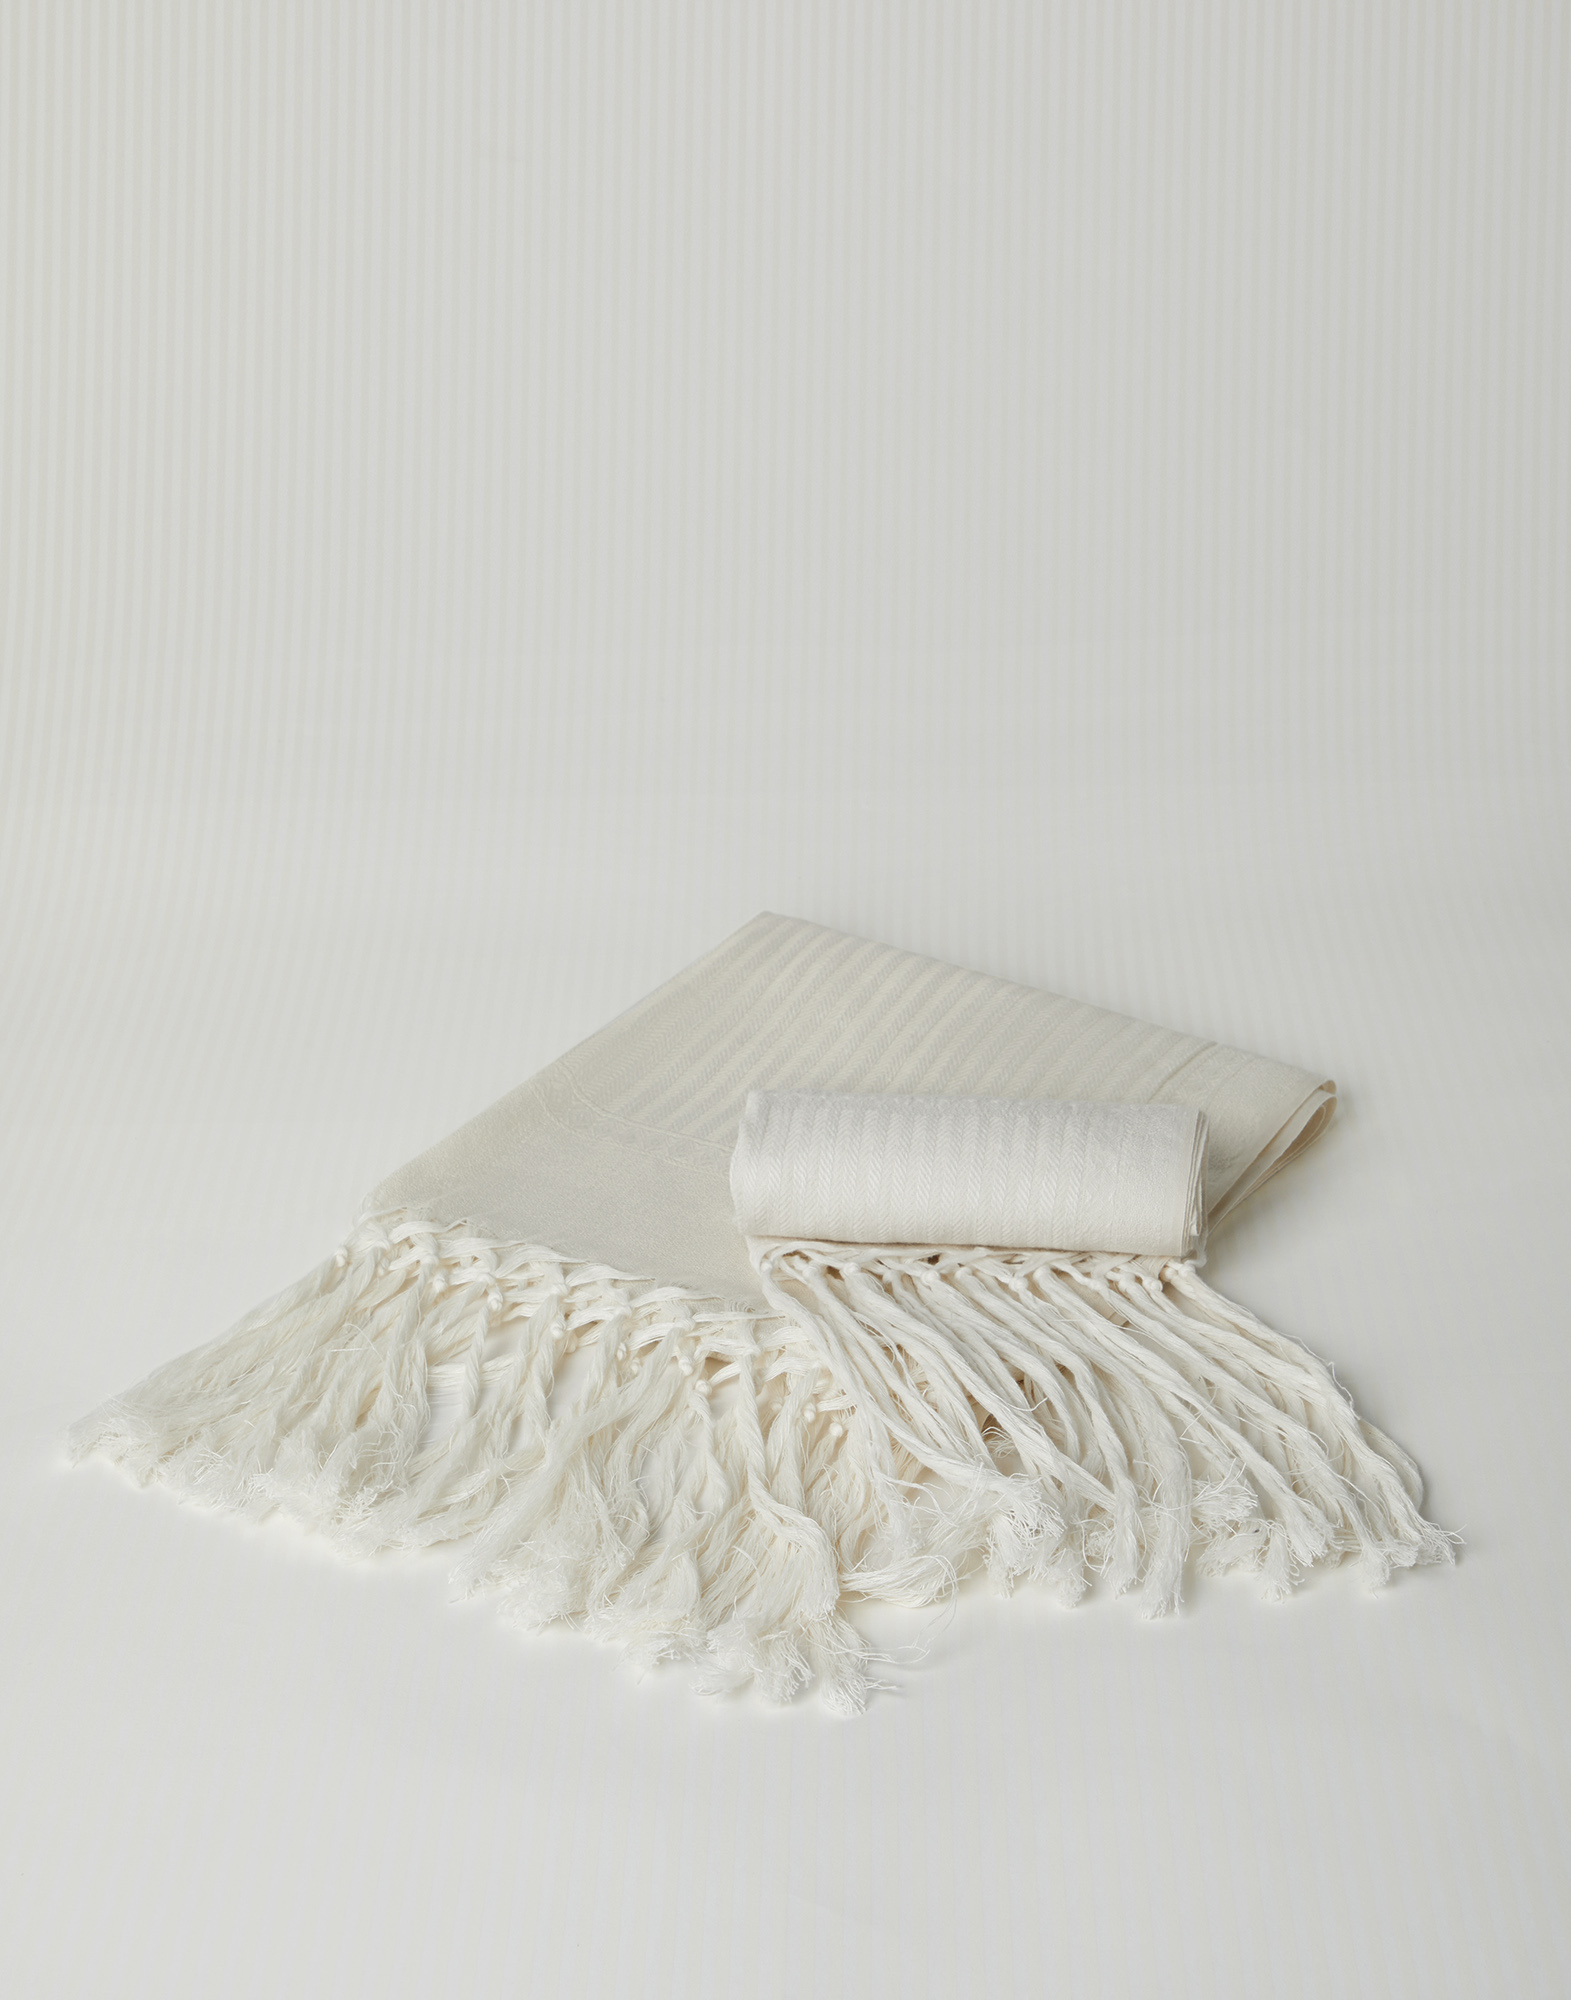 Pair of "Winter in White" towels